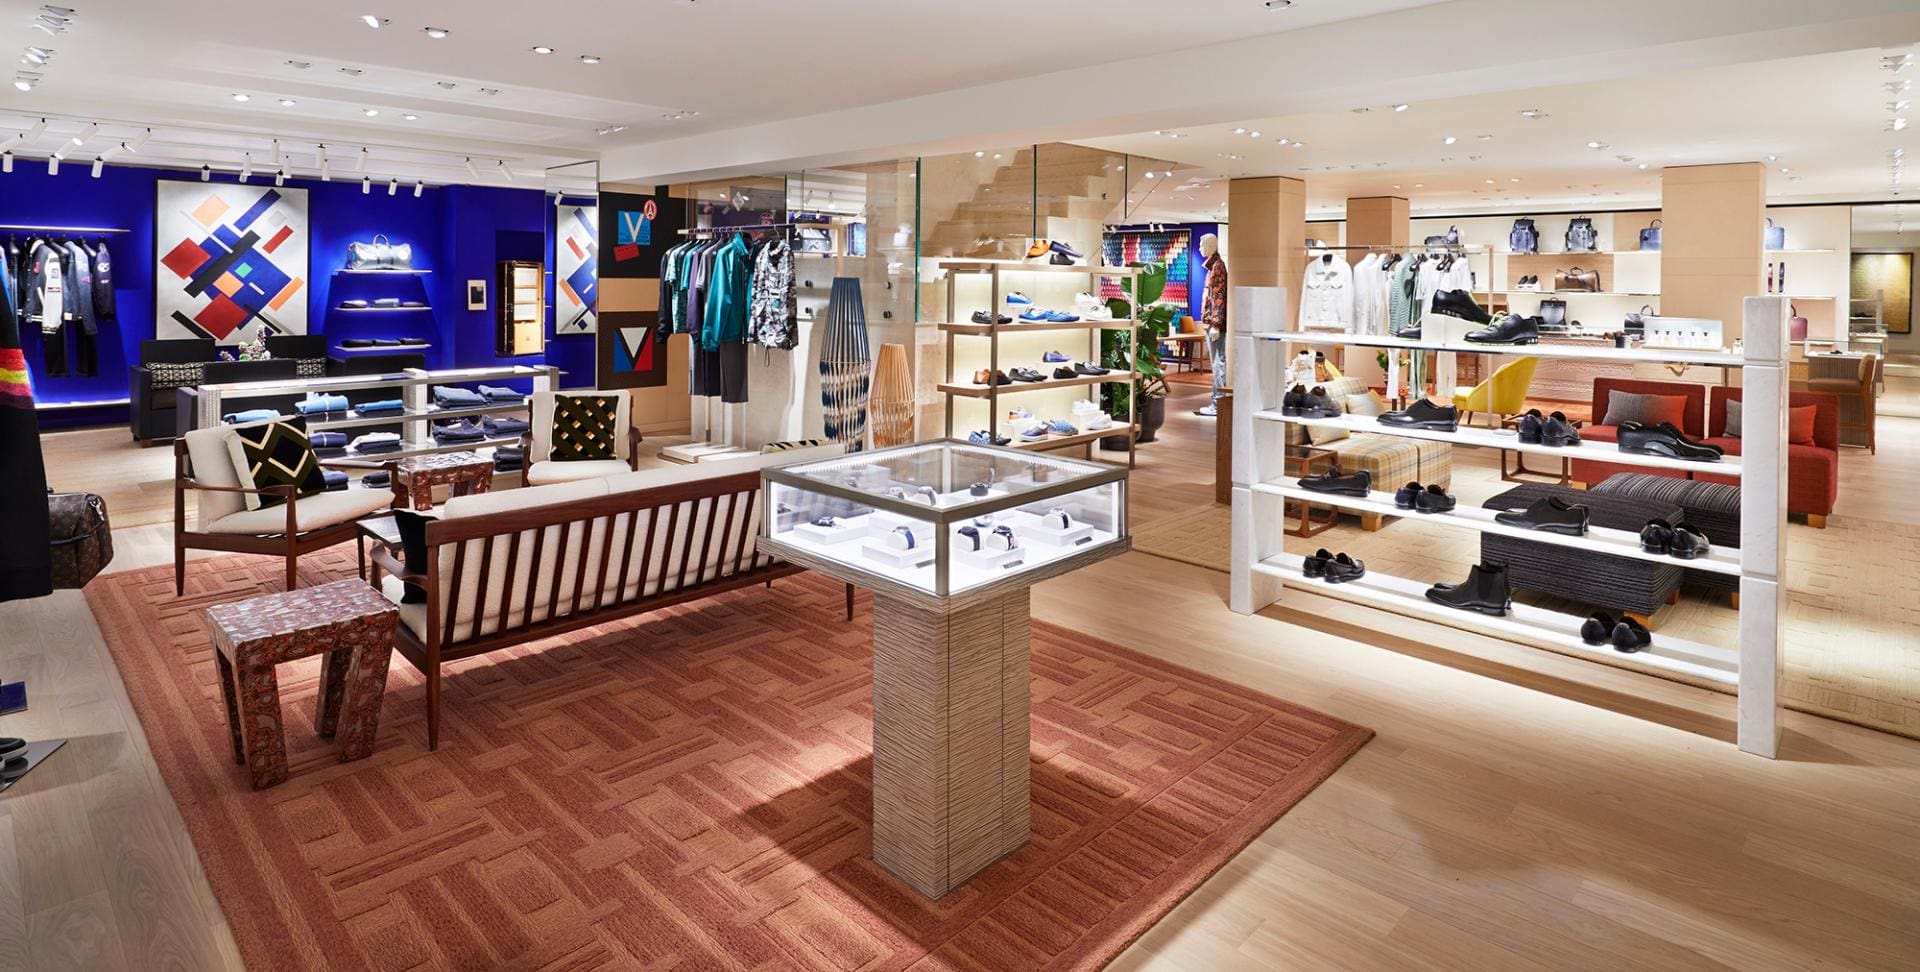 2823 Sloane Street Store Photos and Premium High Res Pictures  Getty  Images